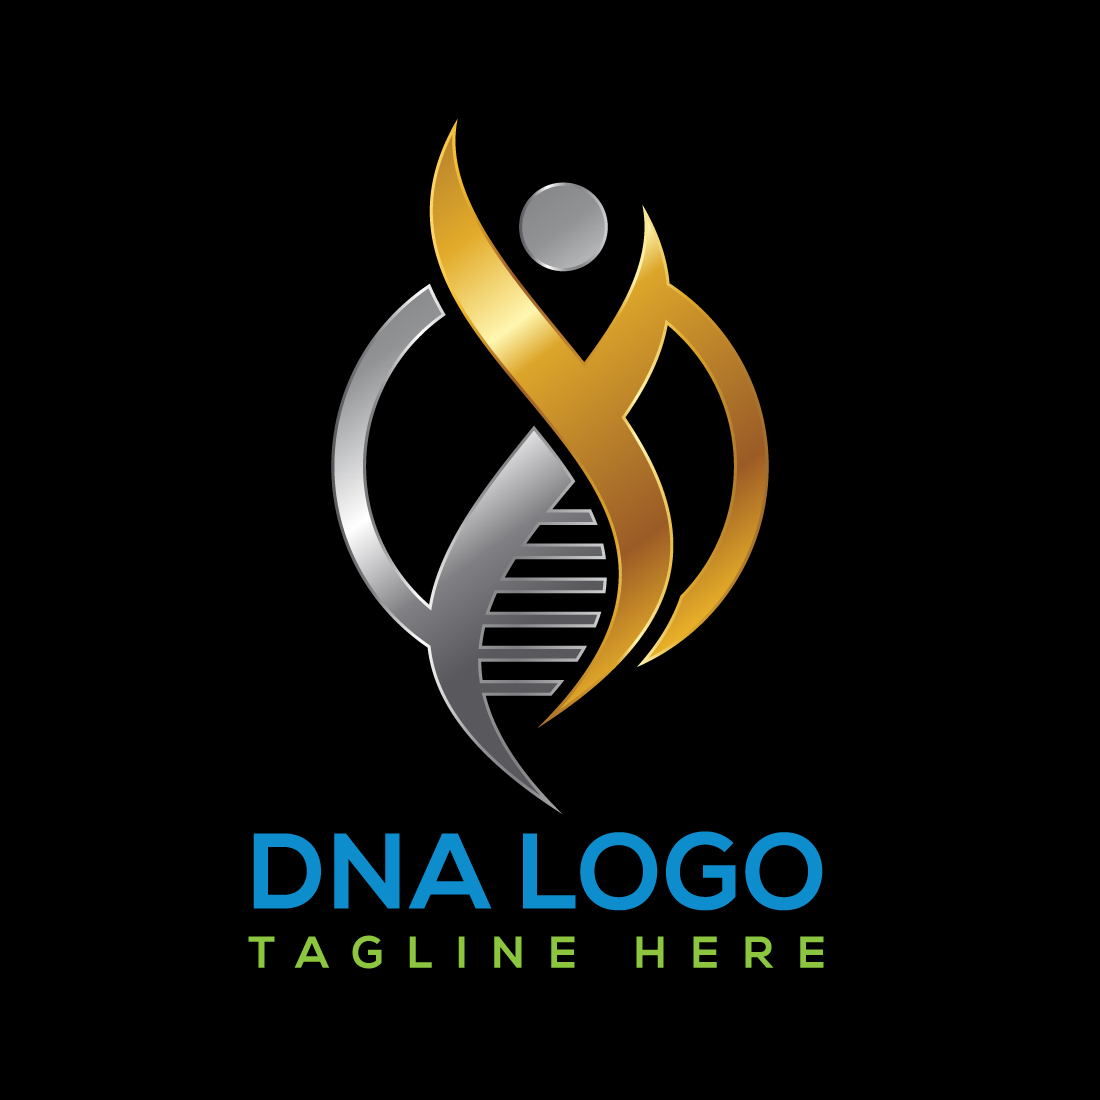 Image of a colorful logo in the form of DNA on a black background.